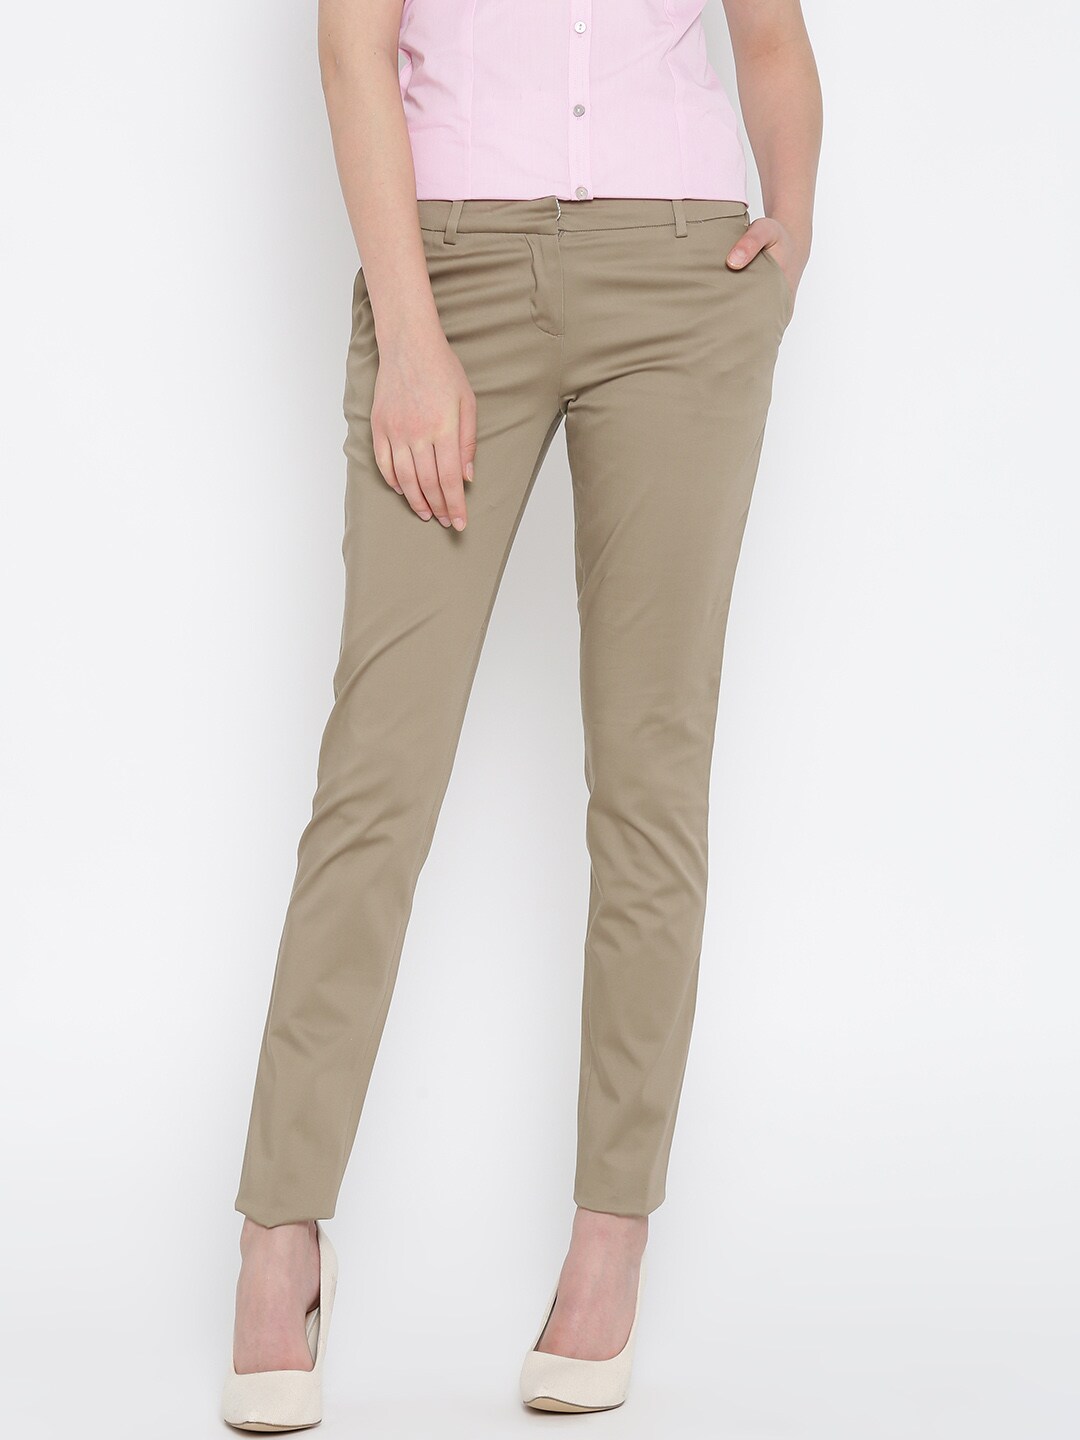 WILLS LIFESTYLE Slim Fit Men Brown Trousers - Buy Beige WILLS LIFESTYLE  Slim Fit Men Brown Trousers Online at Best Prices in India | Flipkart.com